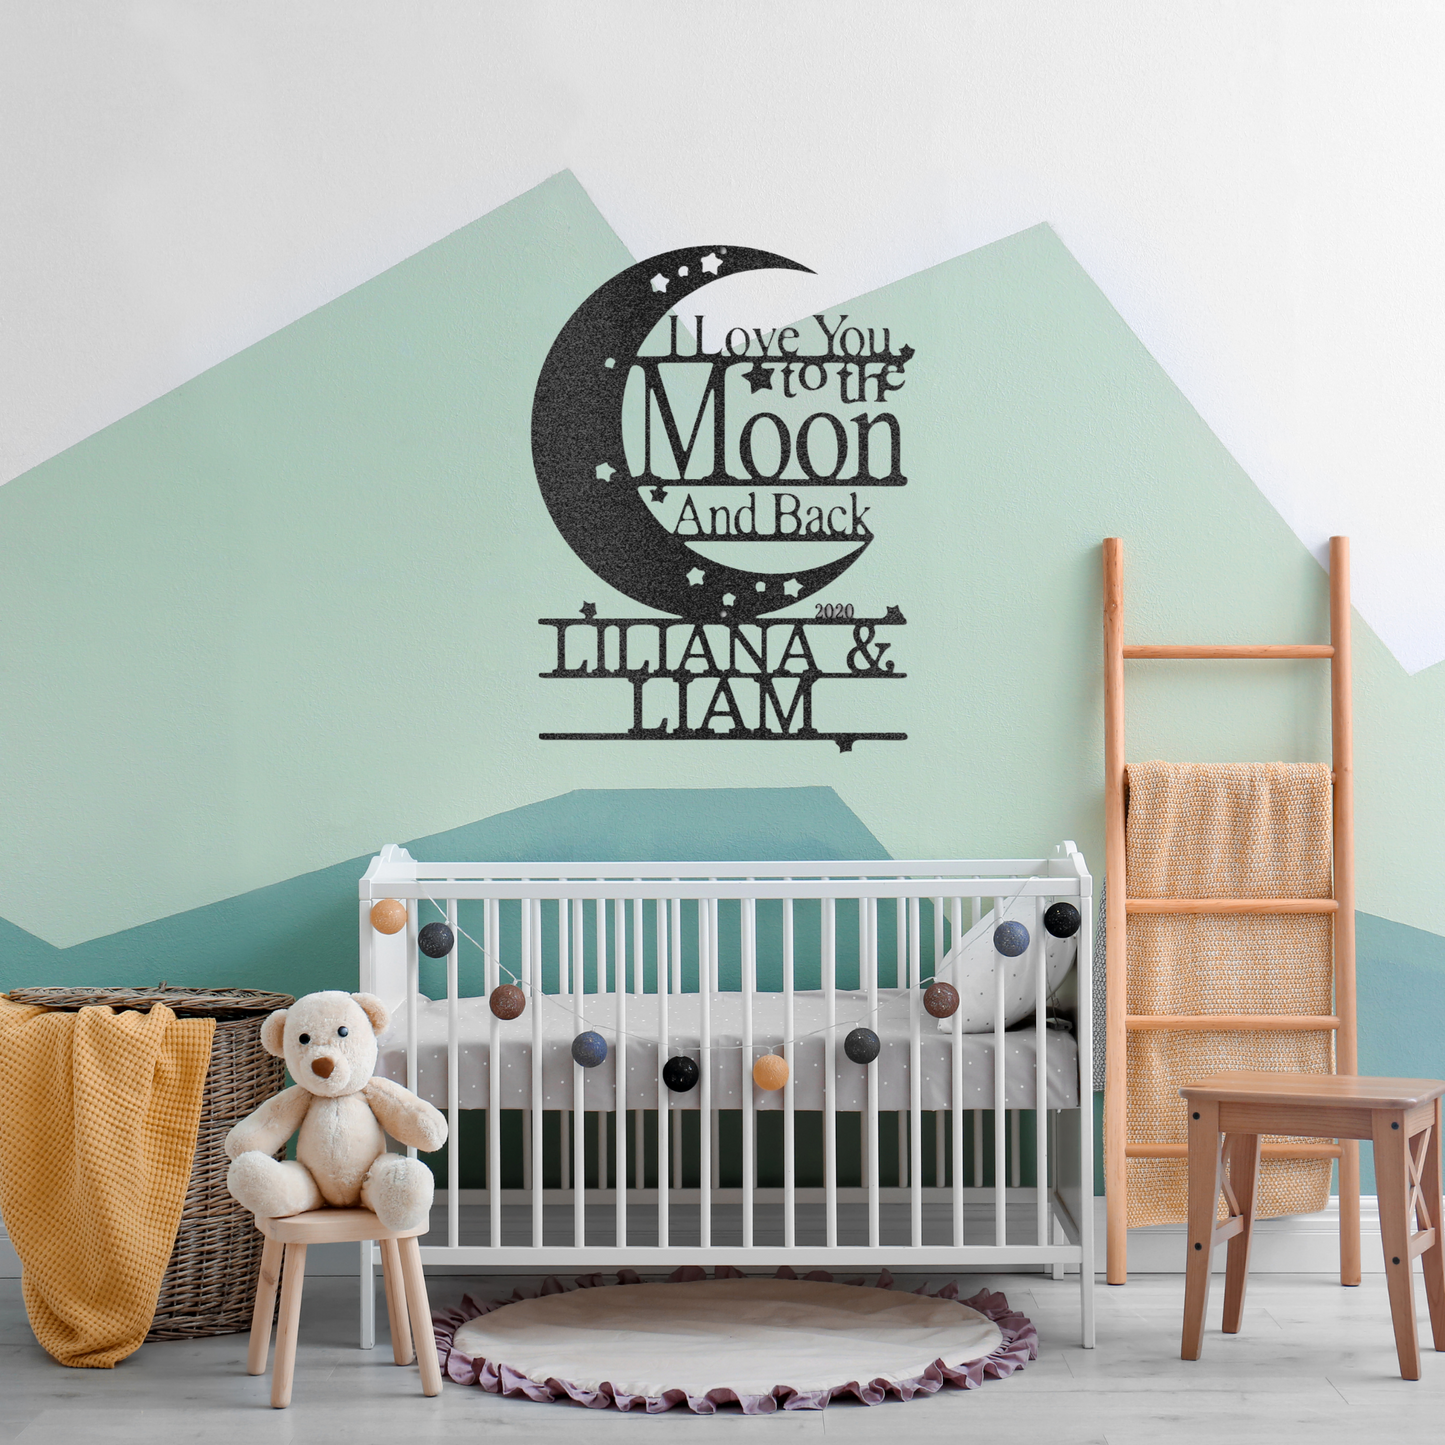 Personalized "I Love You to the Moon and Back" Metal Sign, Nursery Decor, Nursery Sign, Kids Bedroom Sign, Above Crib Sign, Baby Room Decor